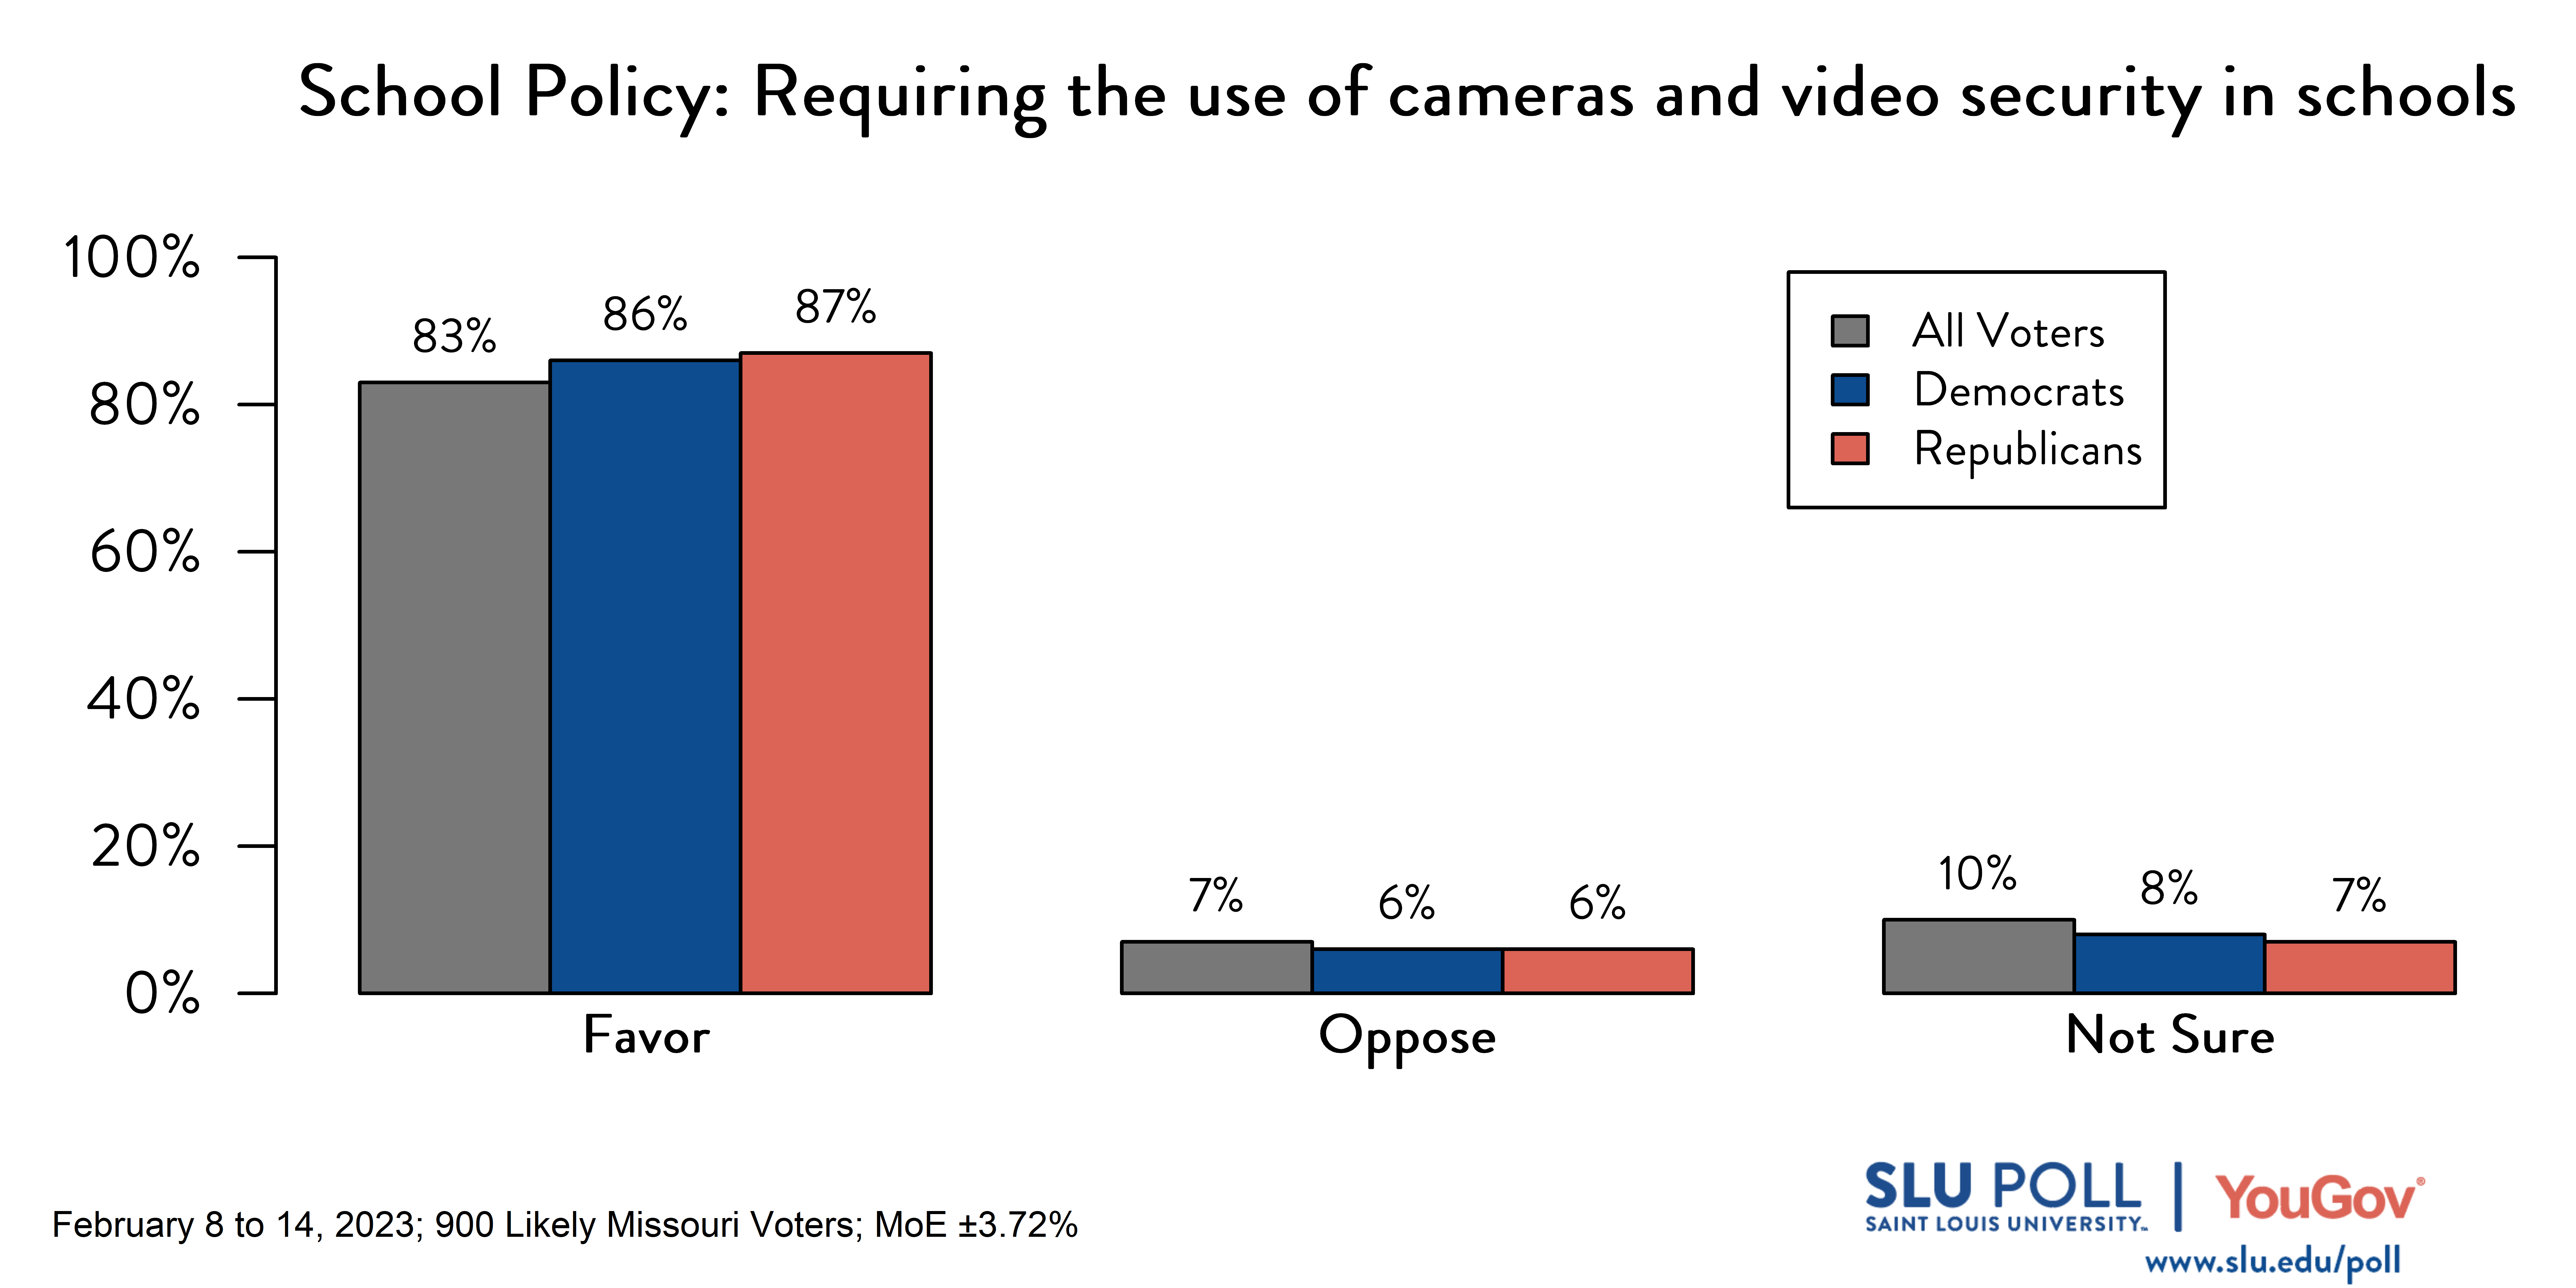 Likely voters' responses to 'Do you favor or oppose the following policies in schools: Requiring the use of cameras and video security in schools?': 83% Favor, 7% Oppose, and 10% Not sure. Democratic voters' responses: ' 86% Favor, 6% Oppose, and 8% Not sure. Republican voters' responses: 87% Favor, 6% Oppose, and 7% Not sure.